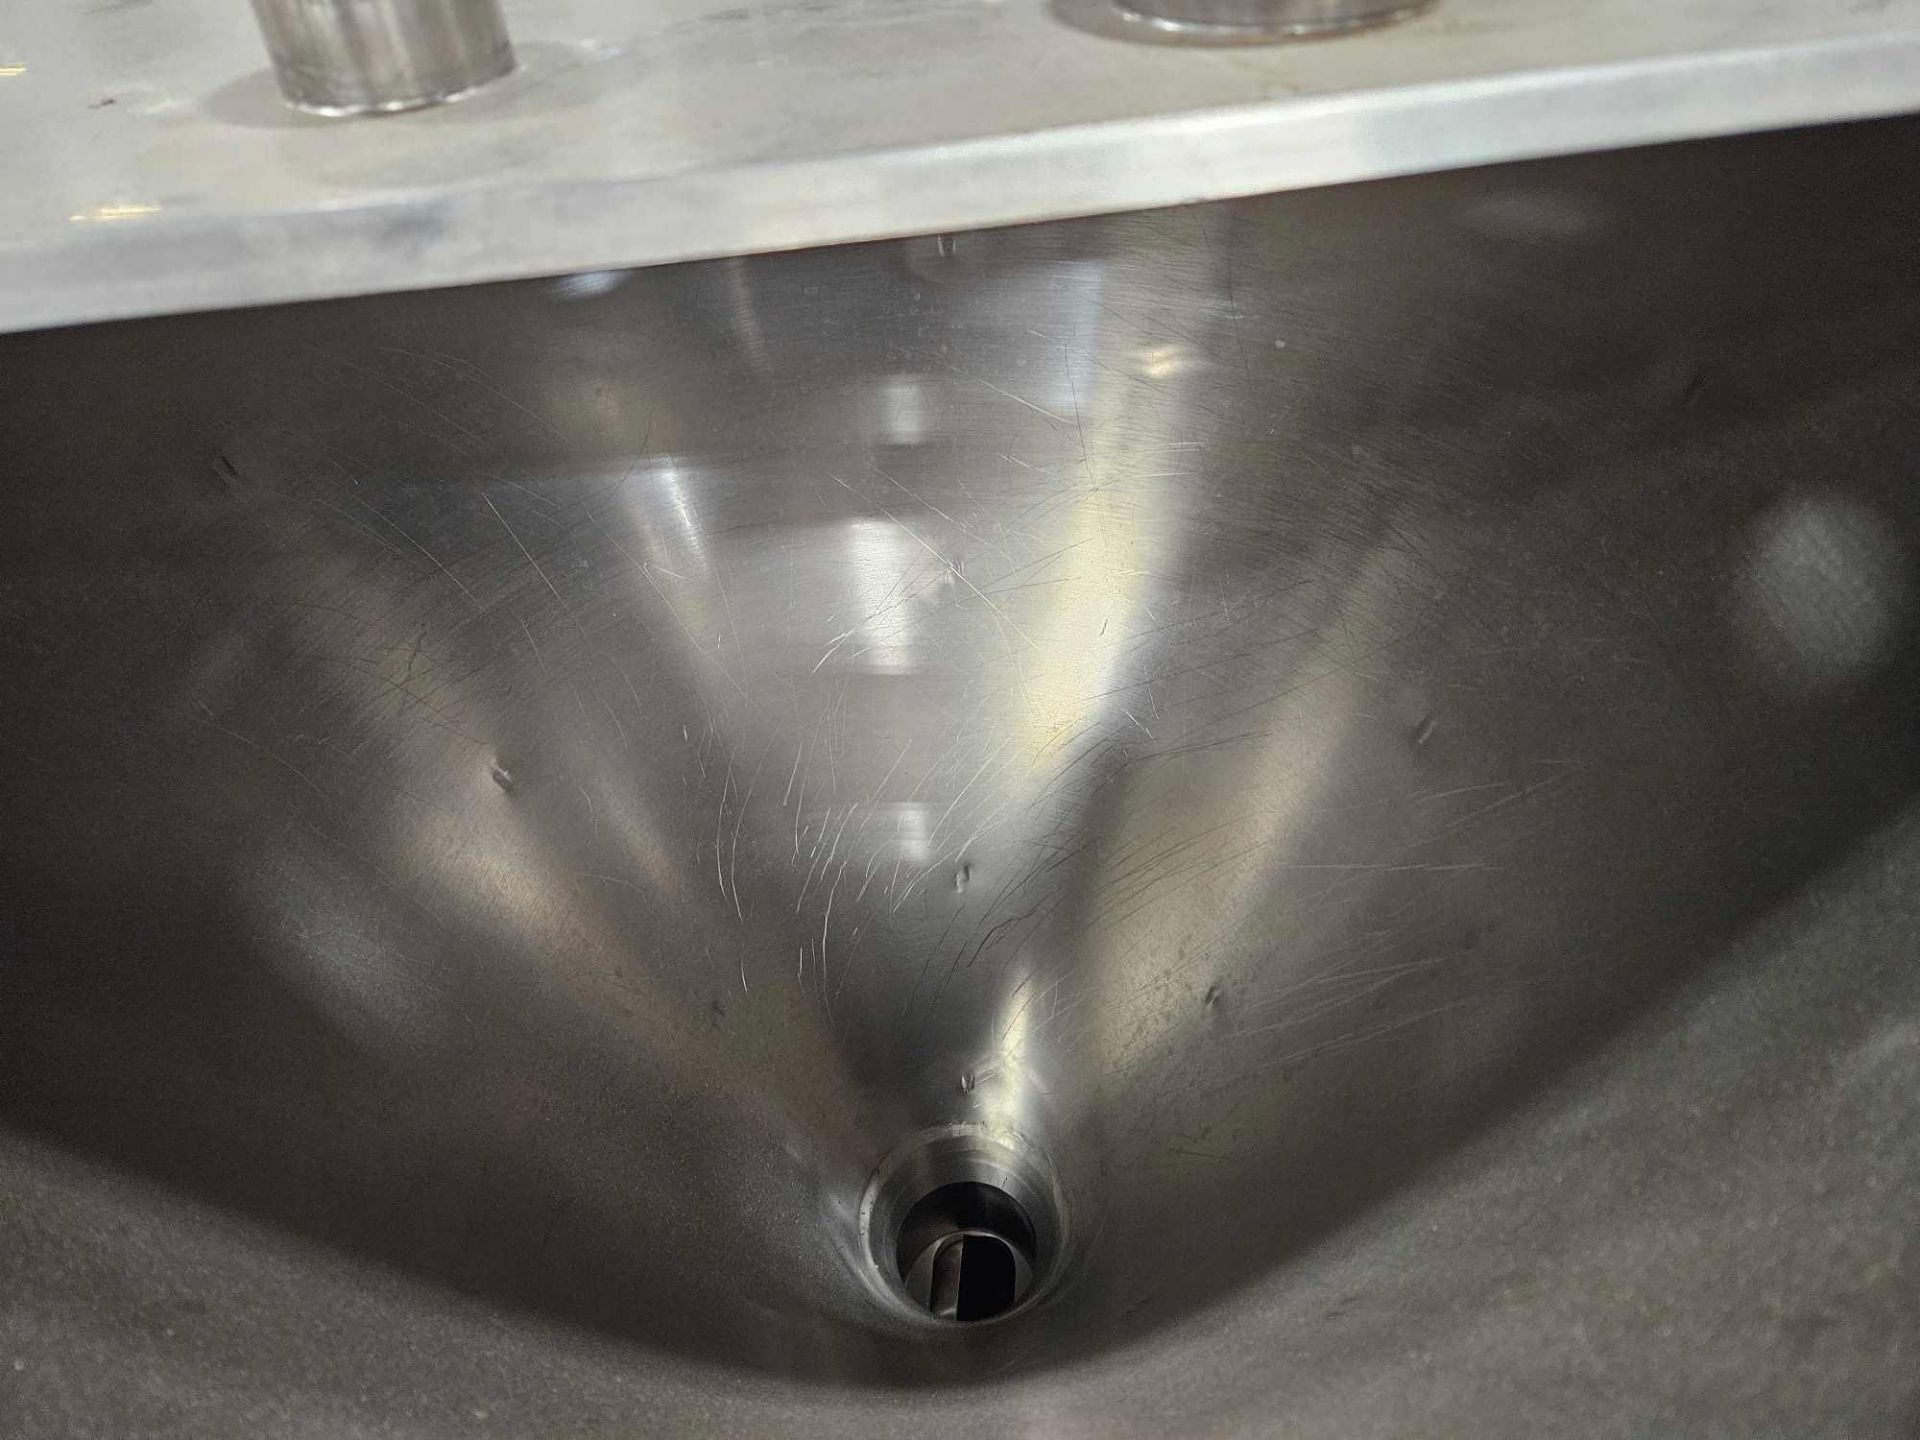 Hinds-Bock Stainless Steel Single Piston Filler - Image 6 of 18